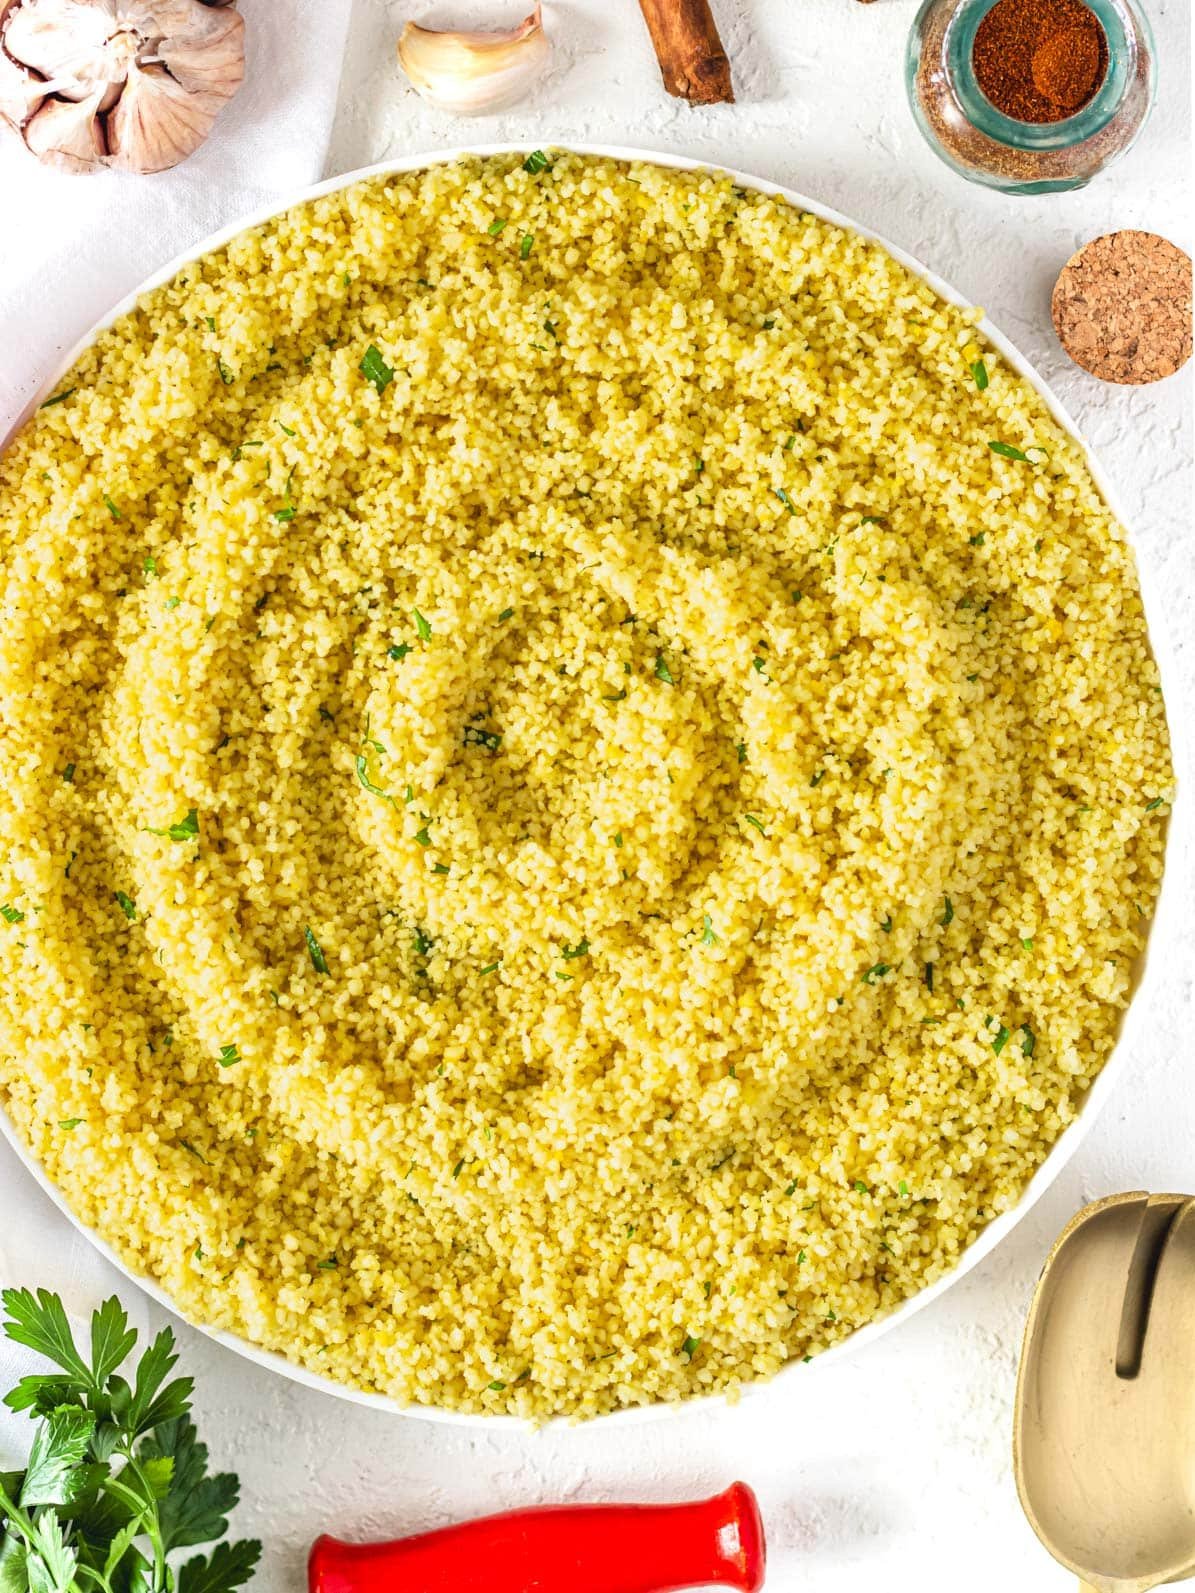 couscous with spices served on a plate with fresh parsley on the side